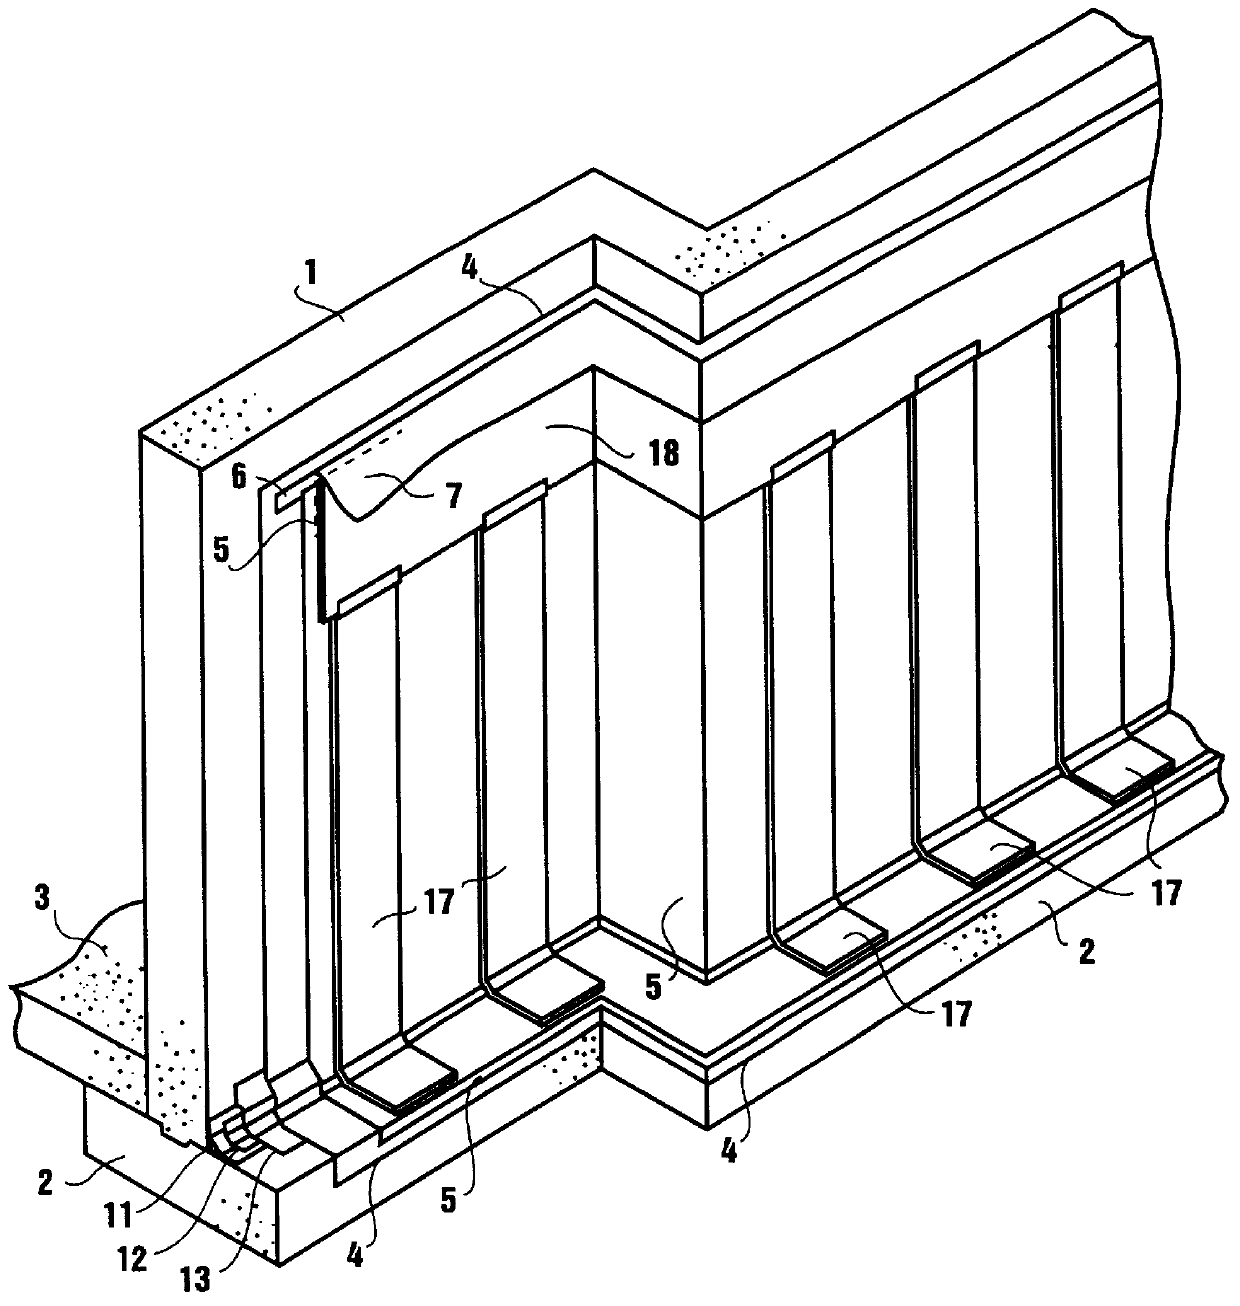 Moisture barrier protection system and method